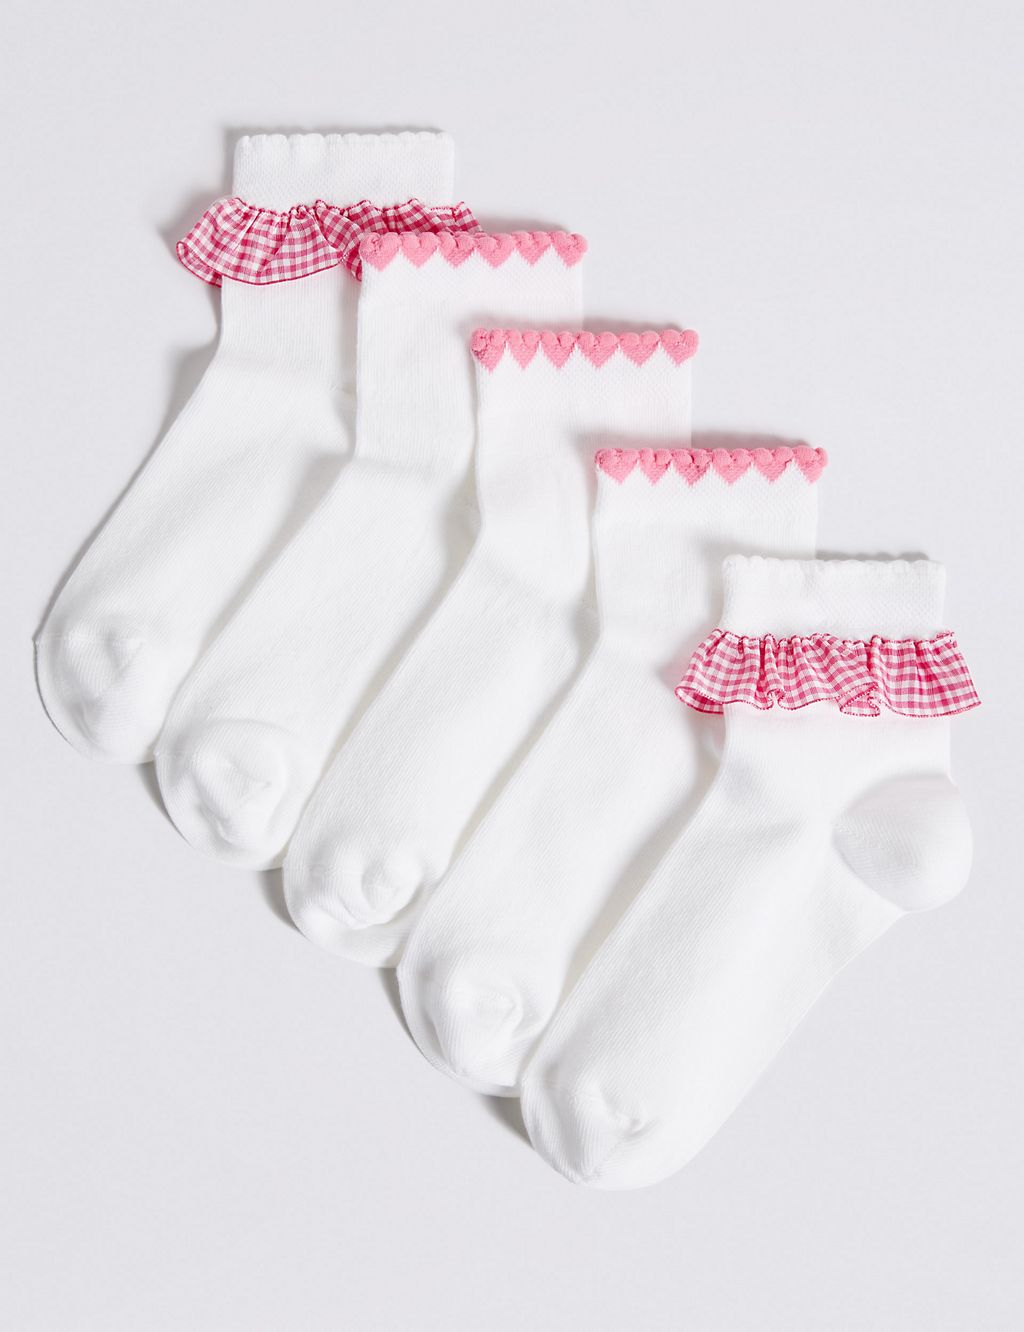 5 Pairs of Frill Ankle Socks 1 of 1